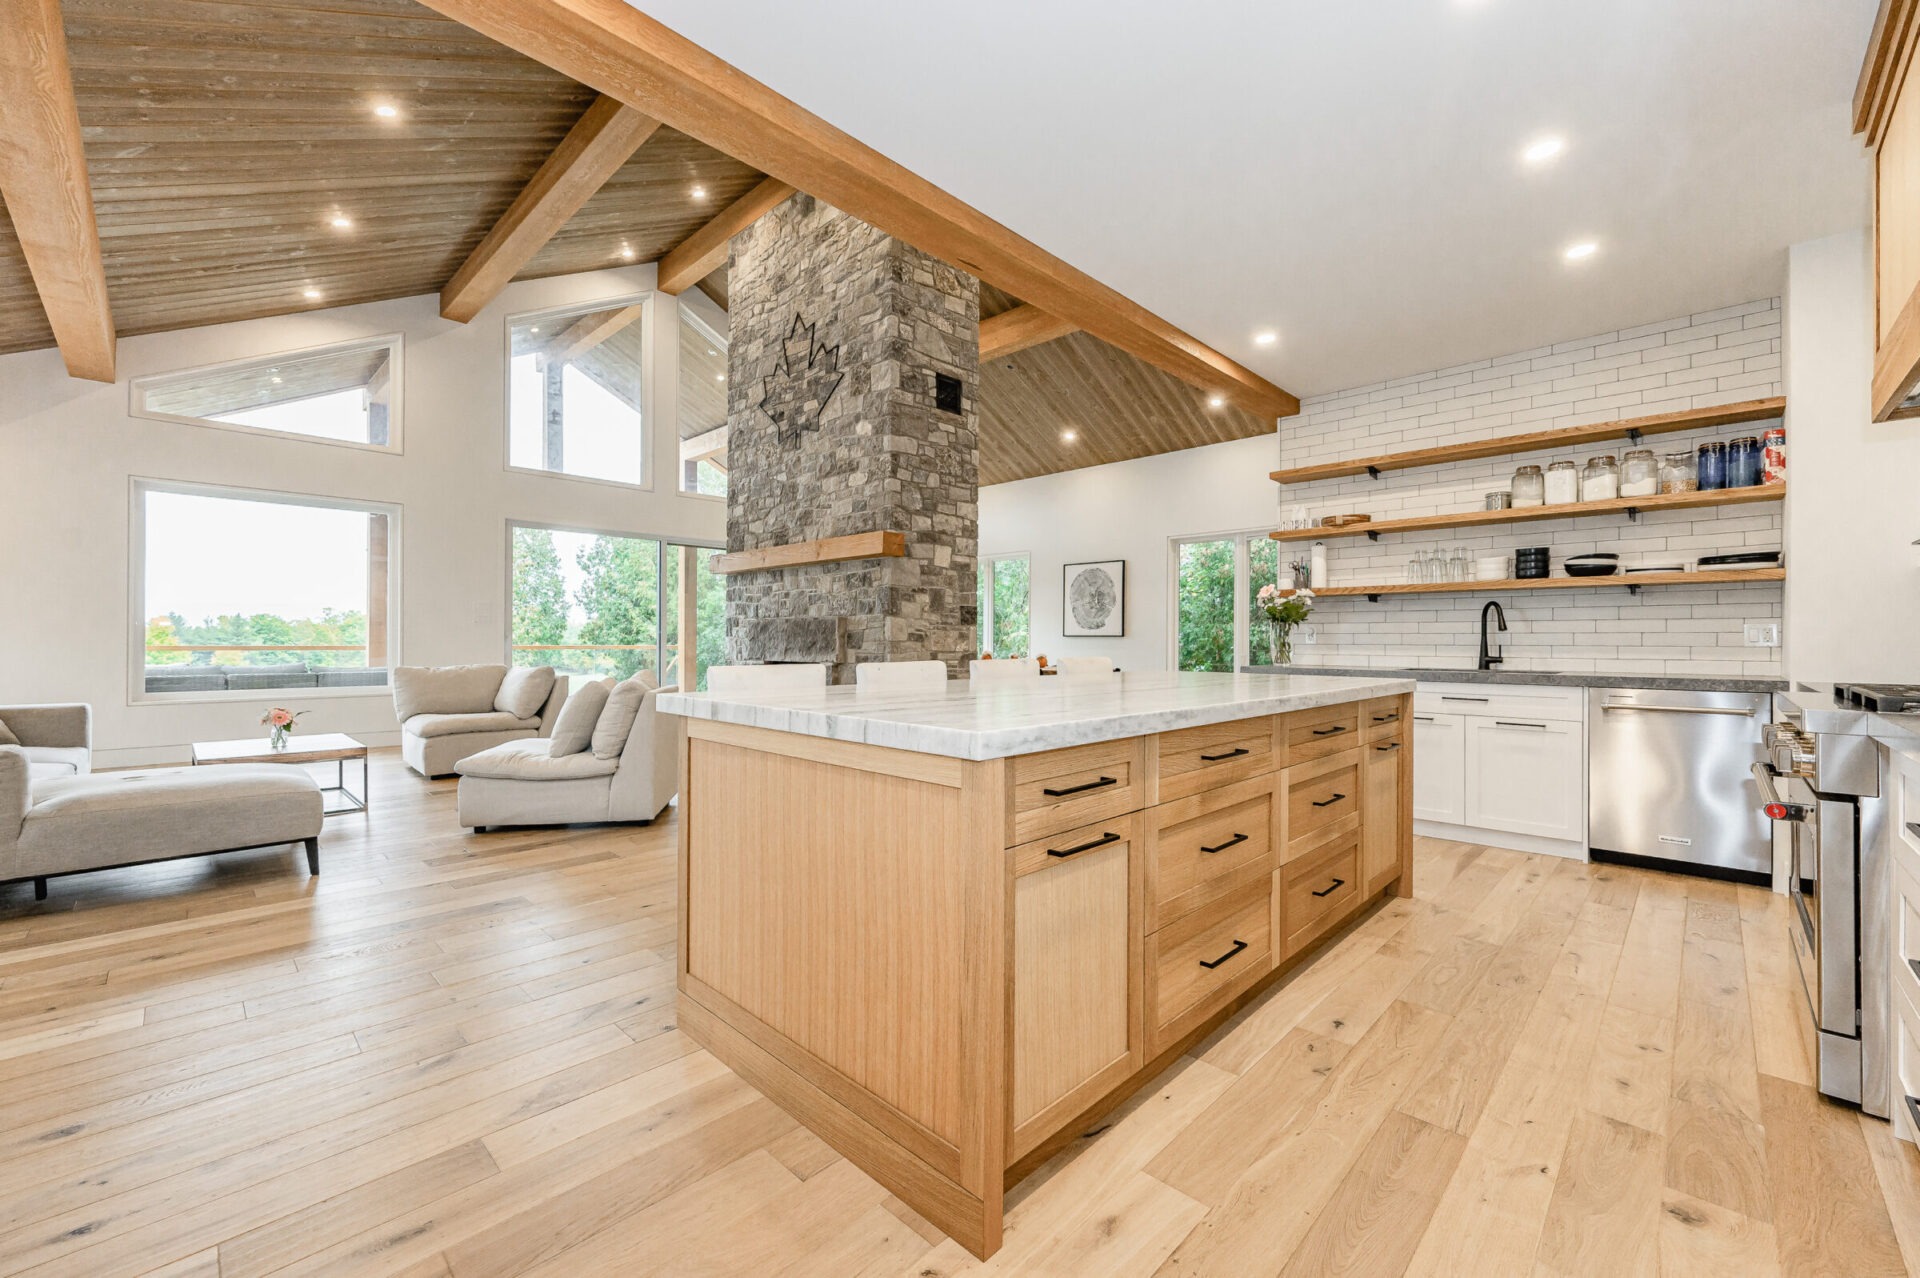 Modern open-plan kitchen with wooden cabinets, stone column, stainless steel appliances, white subway tile backsplash, and adjacent living area with sofa.